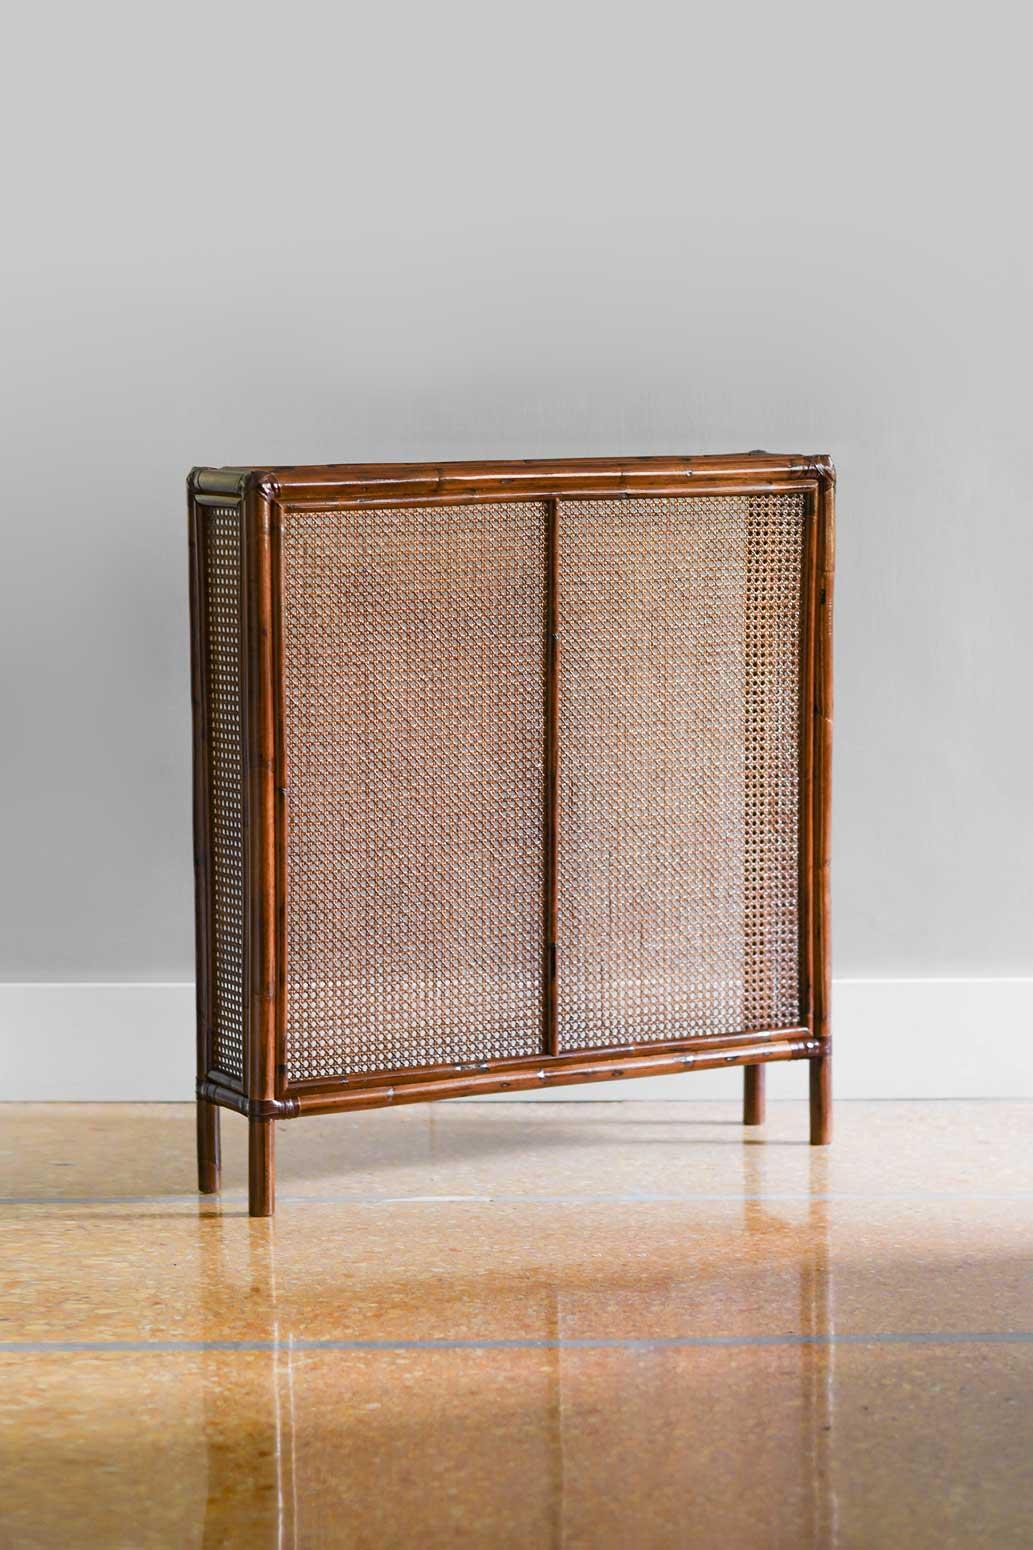 Radiator cover in bamboo and Vienna straw with leather bindings. Molto Editions
Italian artisanal production
Dimensions: 92L x 100H x 20D cm
Other size available please contact us if you need more info